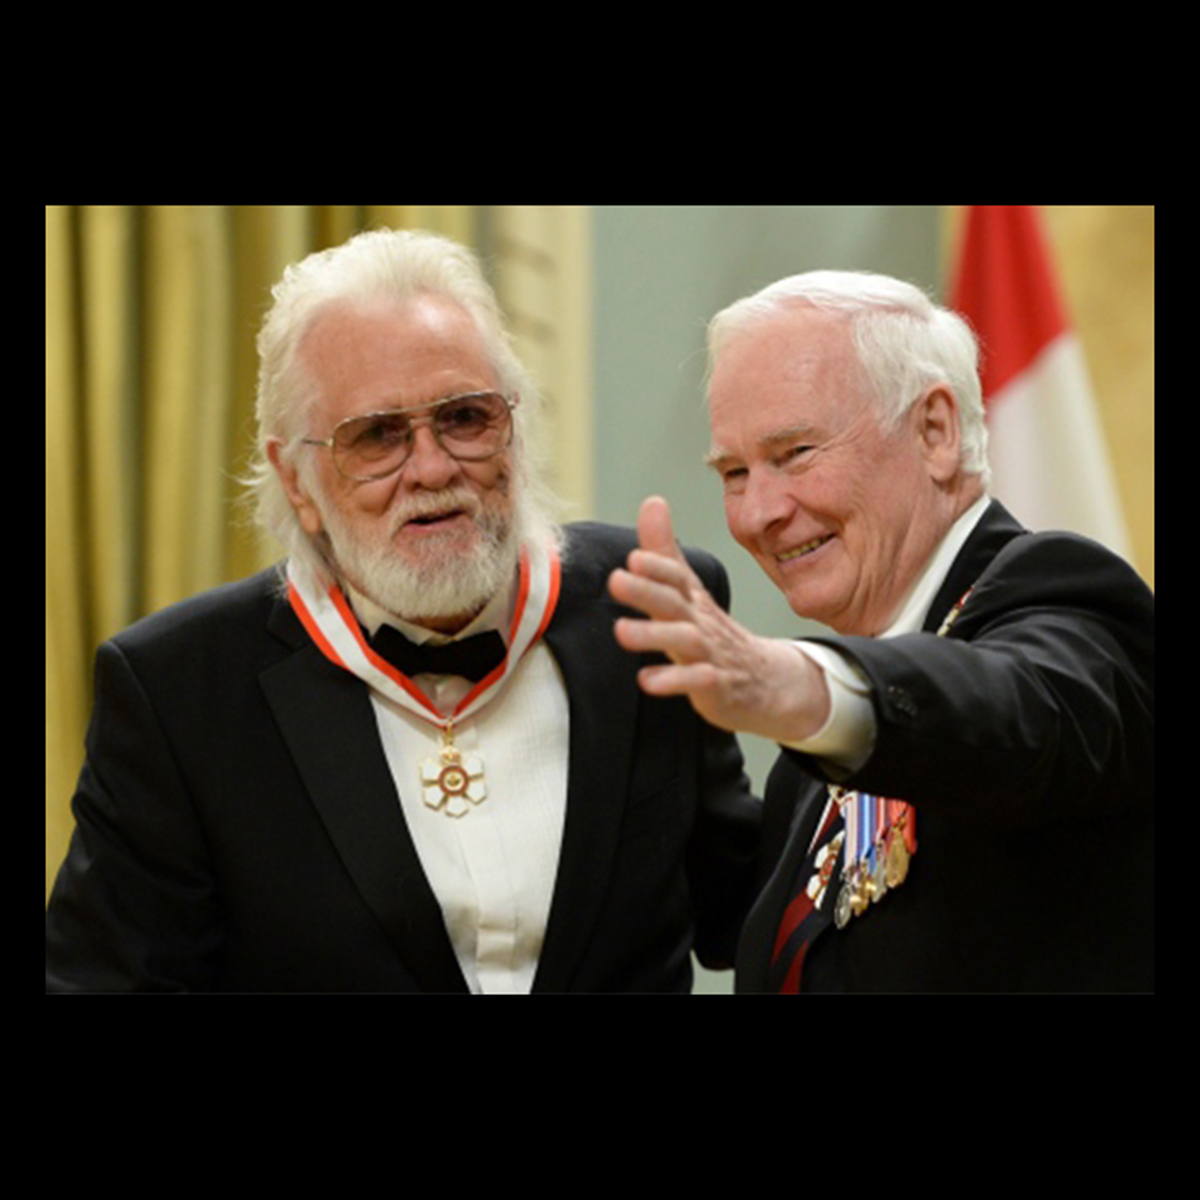 Ronnie Hawkins - Honorary Officer of the Order of Canada Awarded on: May 2, 2013